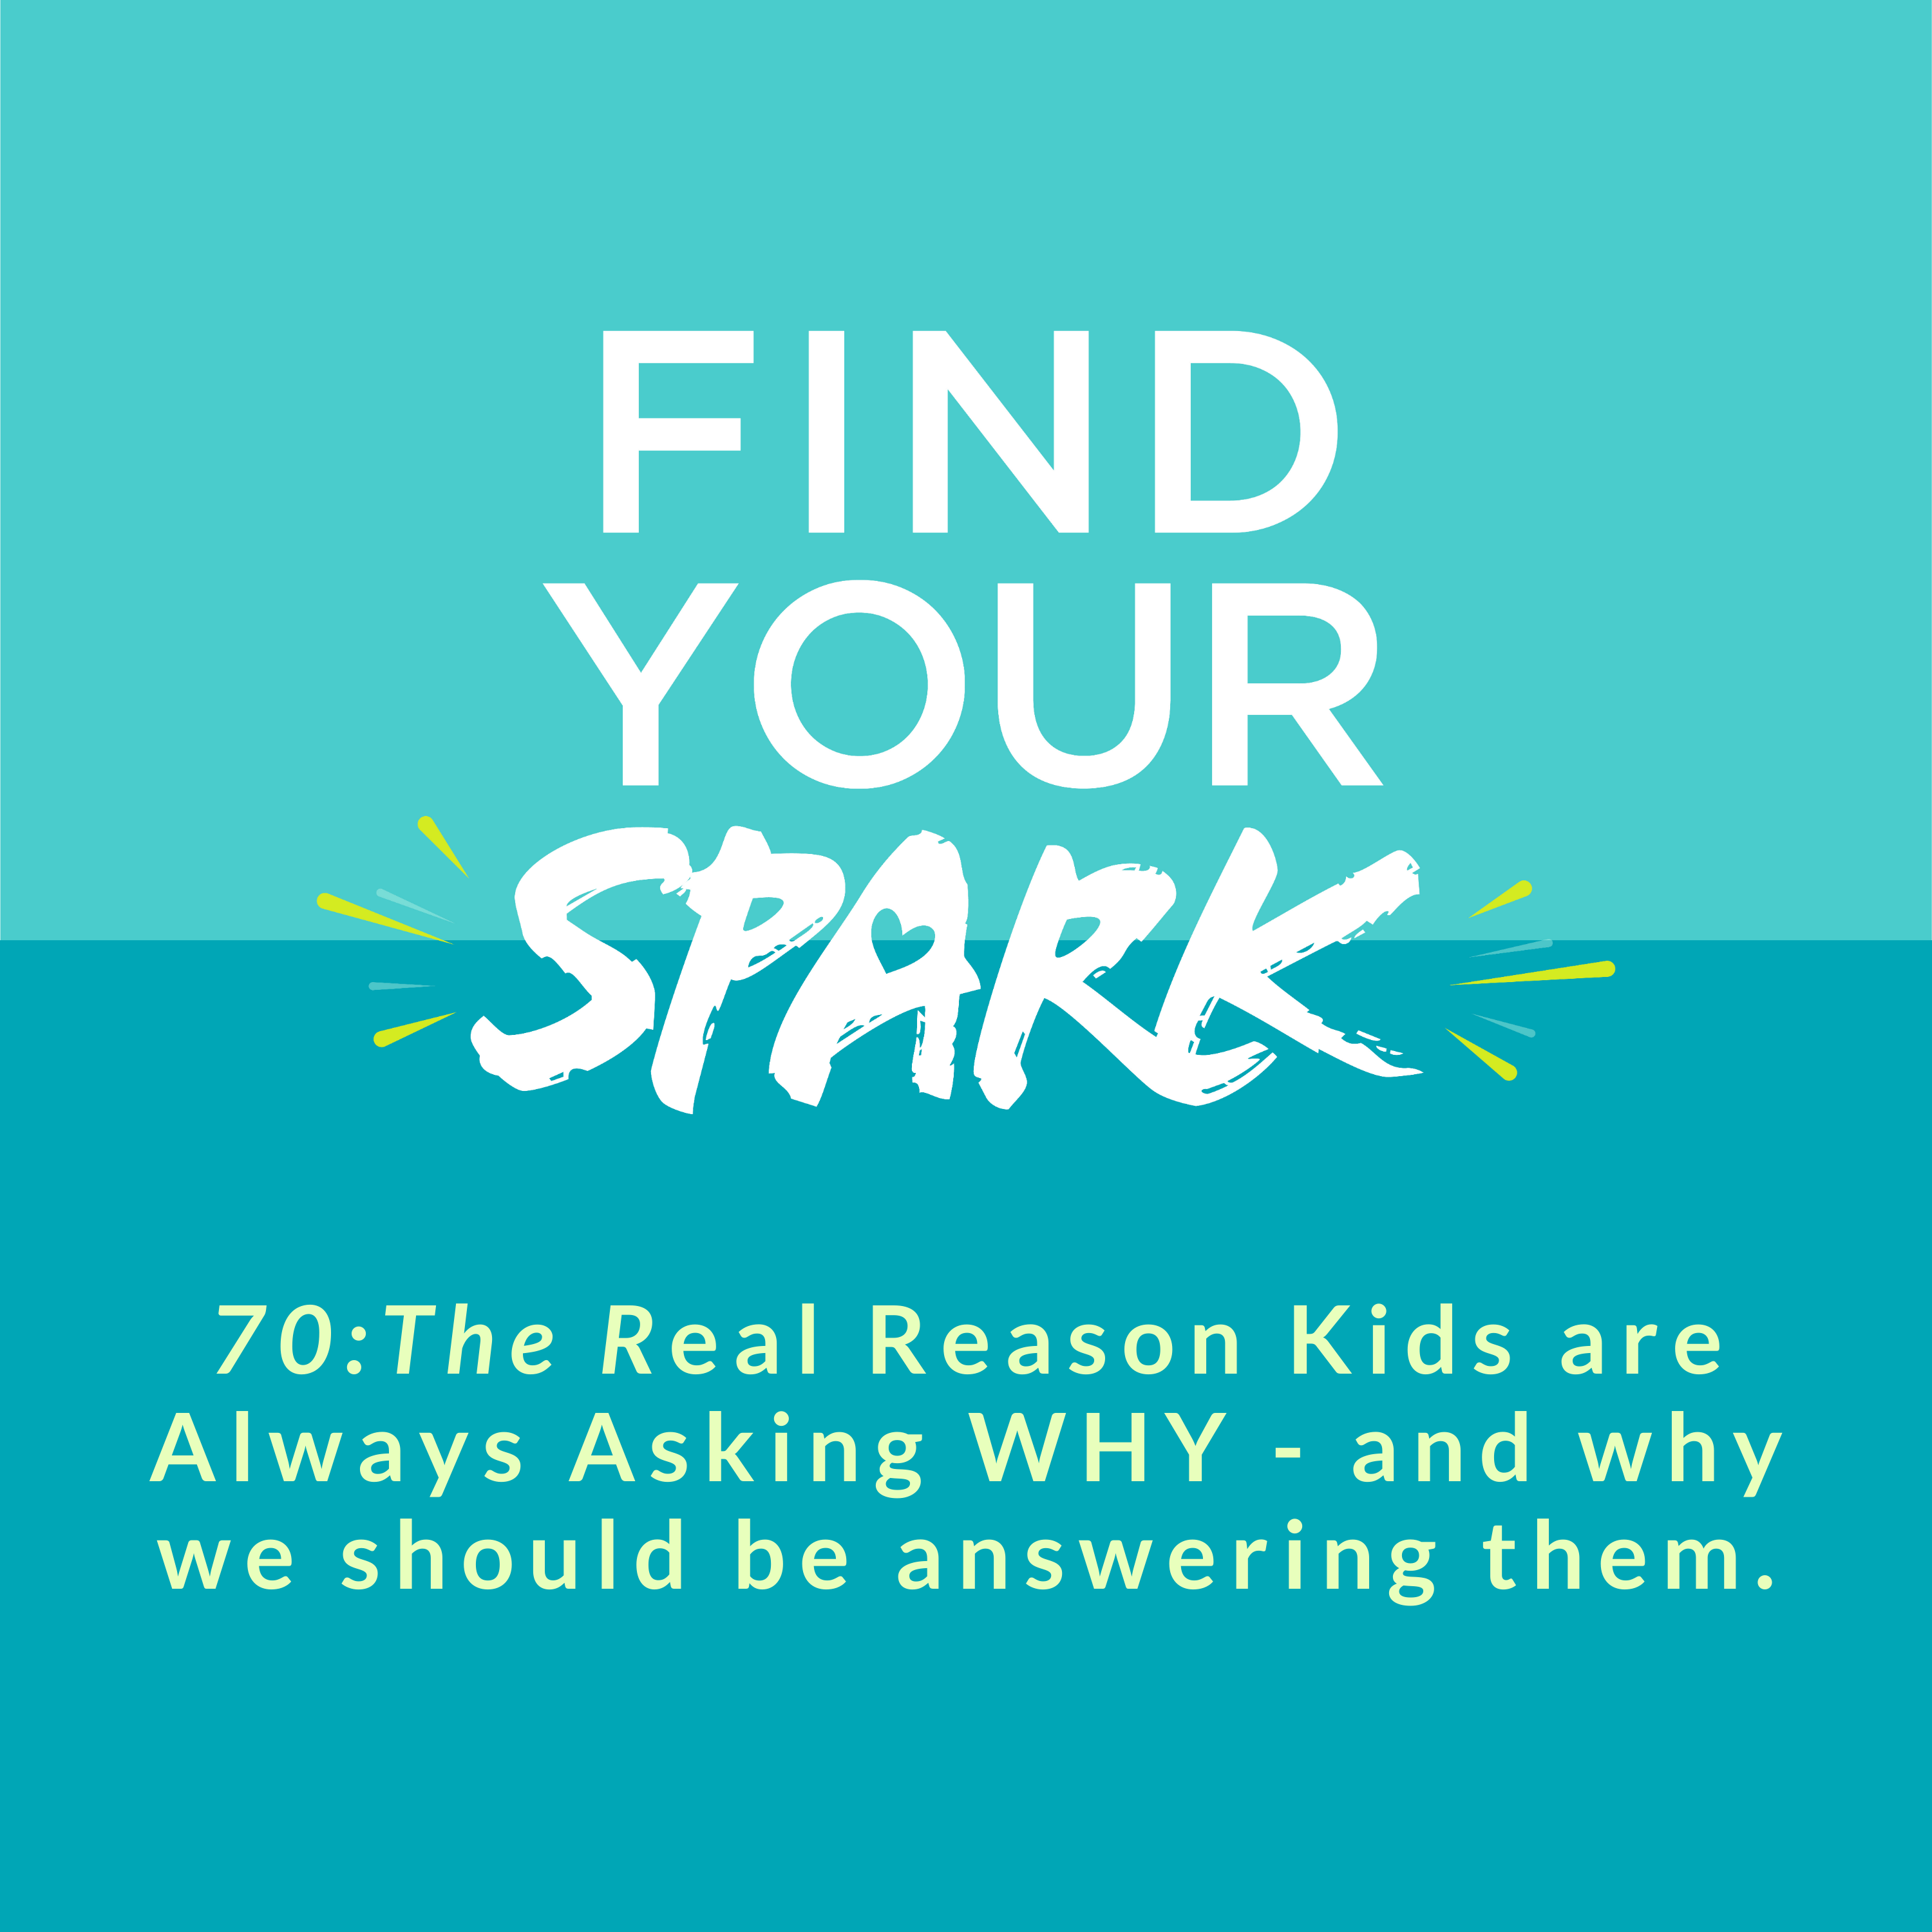 70: The Real Reason Kids are Always Asking WHY - and why we should be answering them.